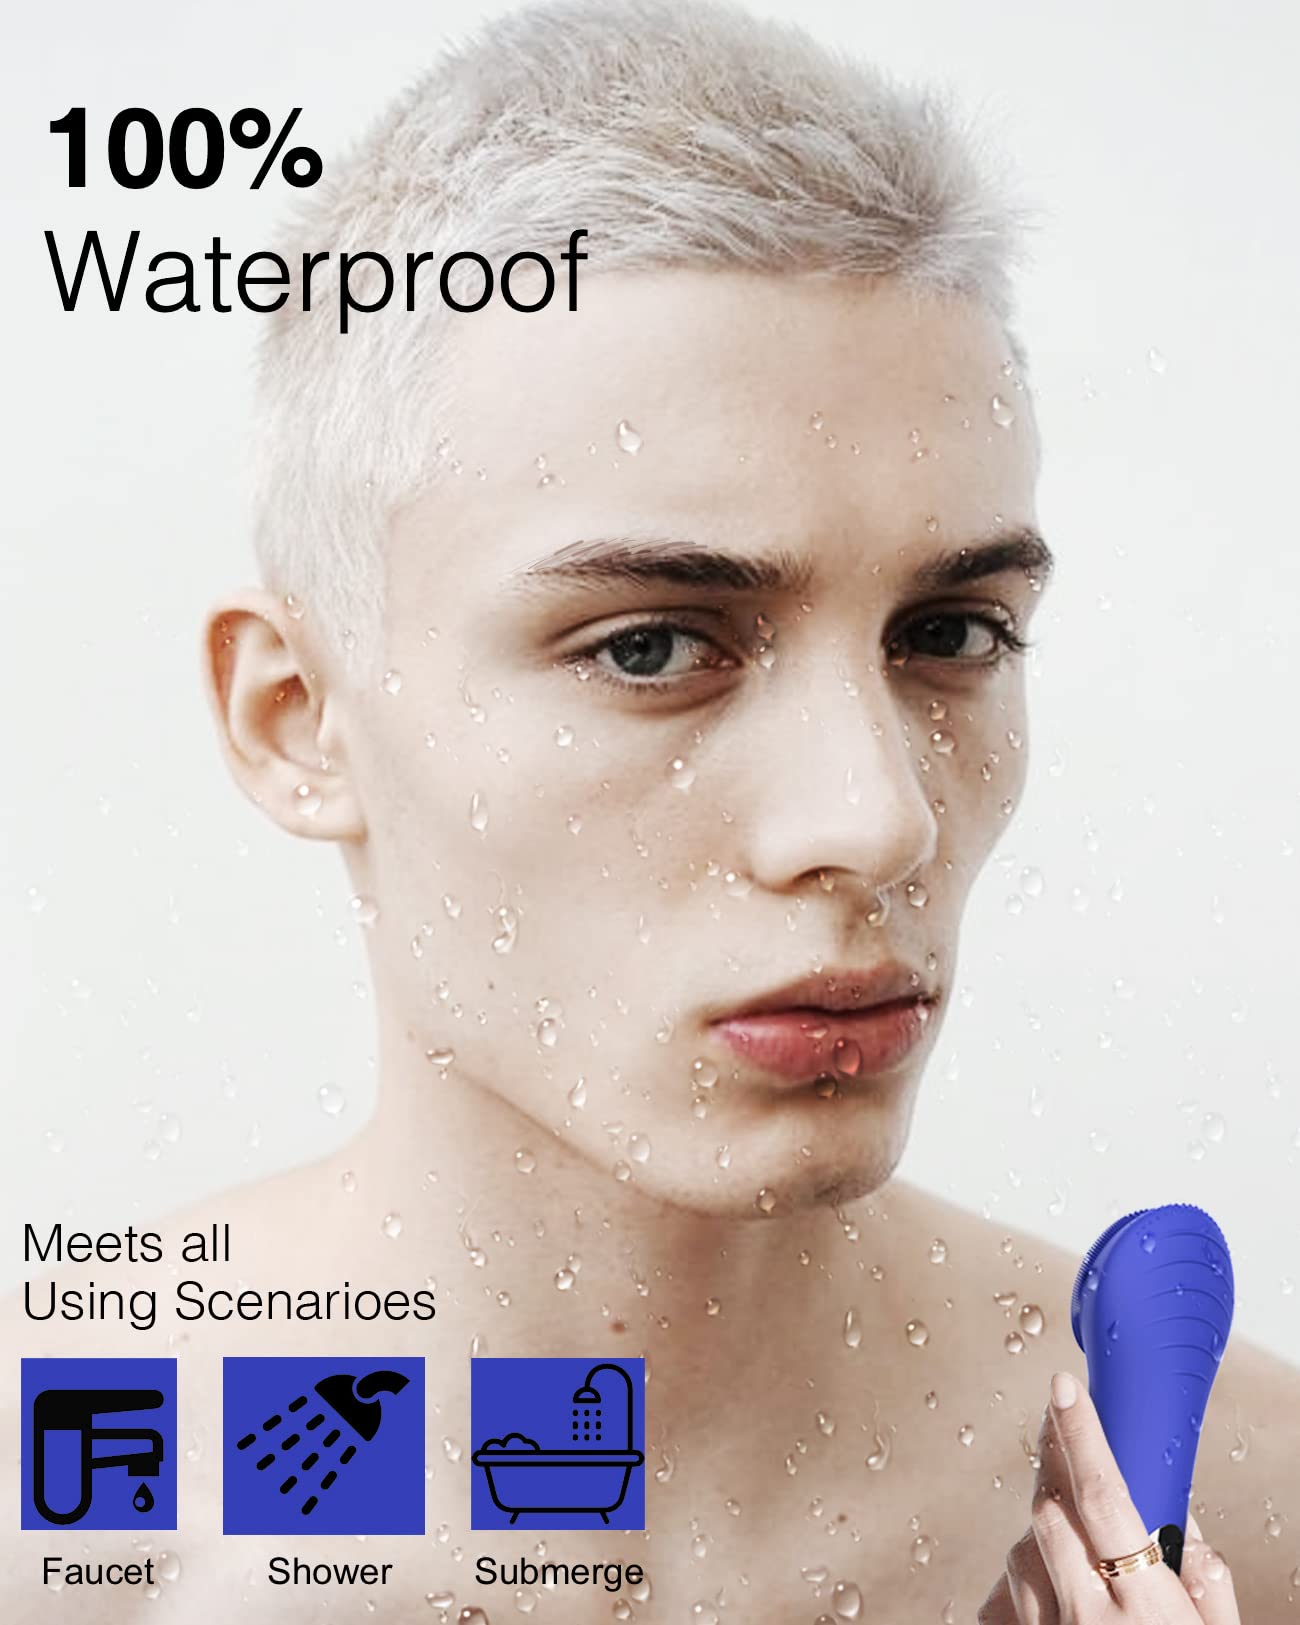 NågraCoola CLIE Facial Cleansing Brush, Waterproof and Rechargeable Face Scrub Brush for Men & Women, Cleansing, Exfoliating and Massaging, Electric Face Scrubber - Blue